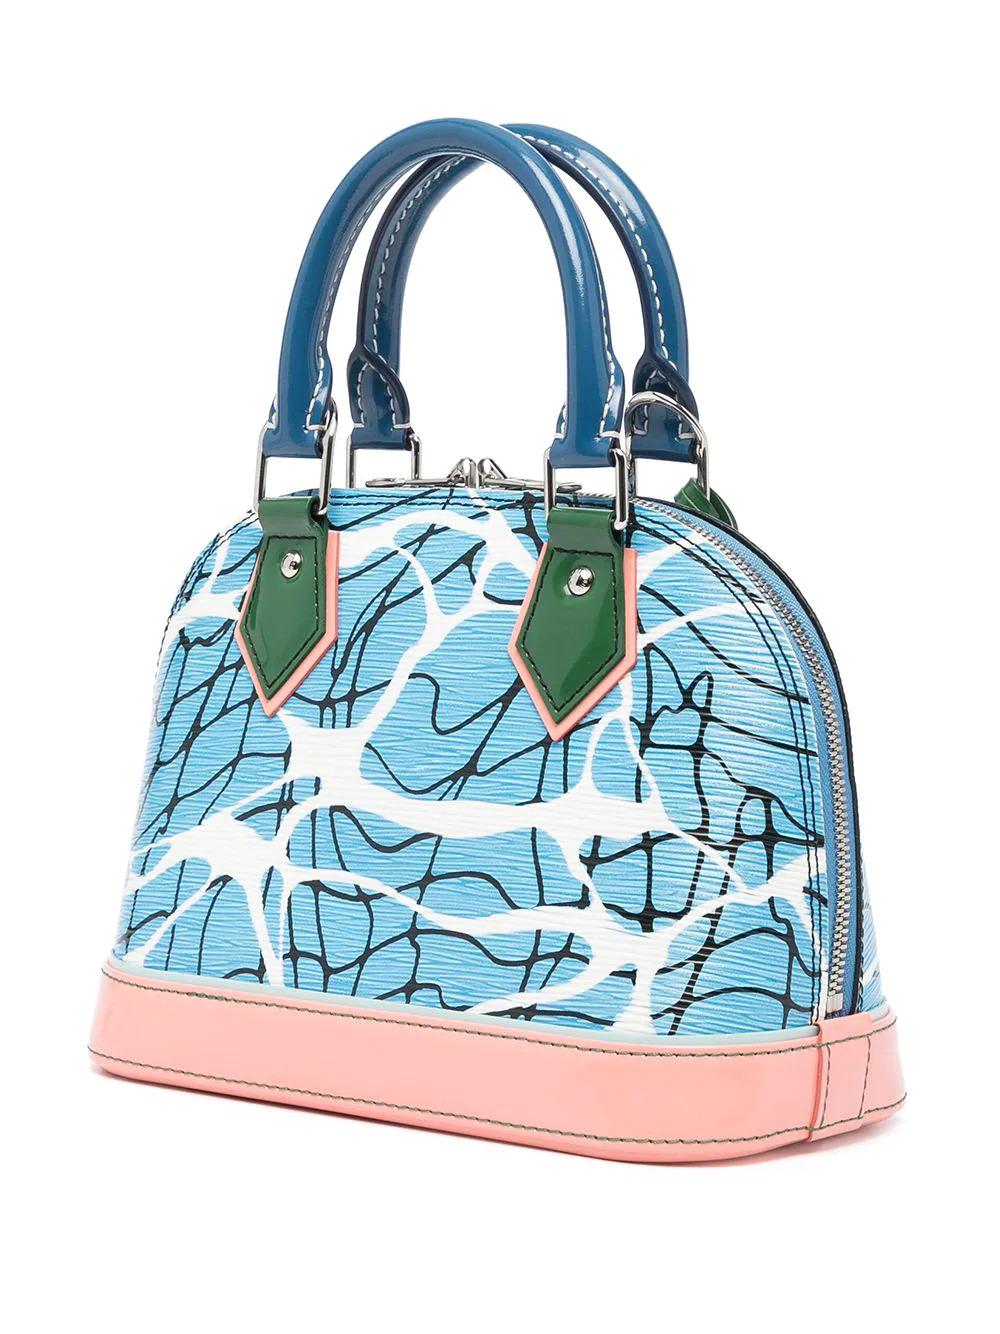 Inspired by California and its crystal blue water pools, this limited-edition pre-owned Louis Vuitton Alma bag from the 2016 Cruise runway collection has been crafted in reviving shades of blue, white, and green. Finished with a pastel pink base and